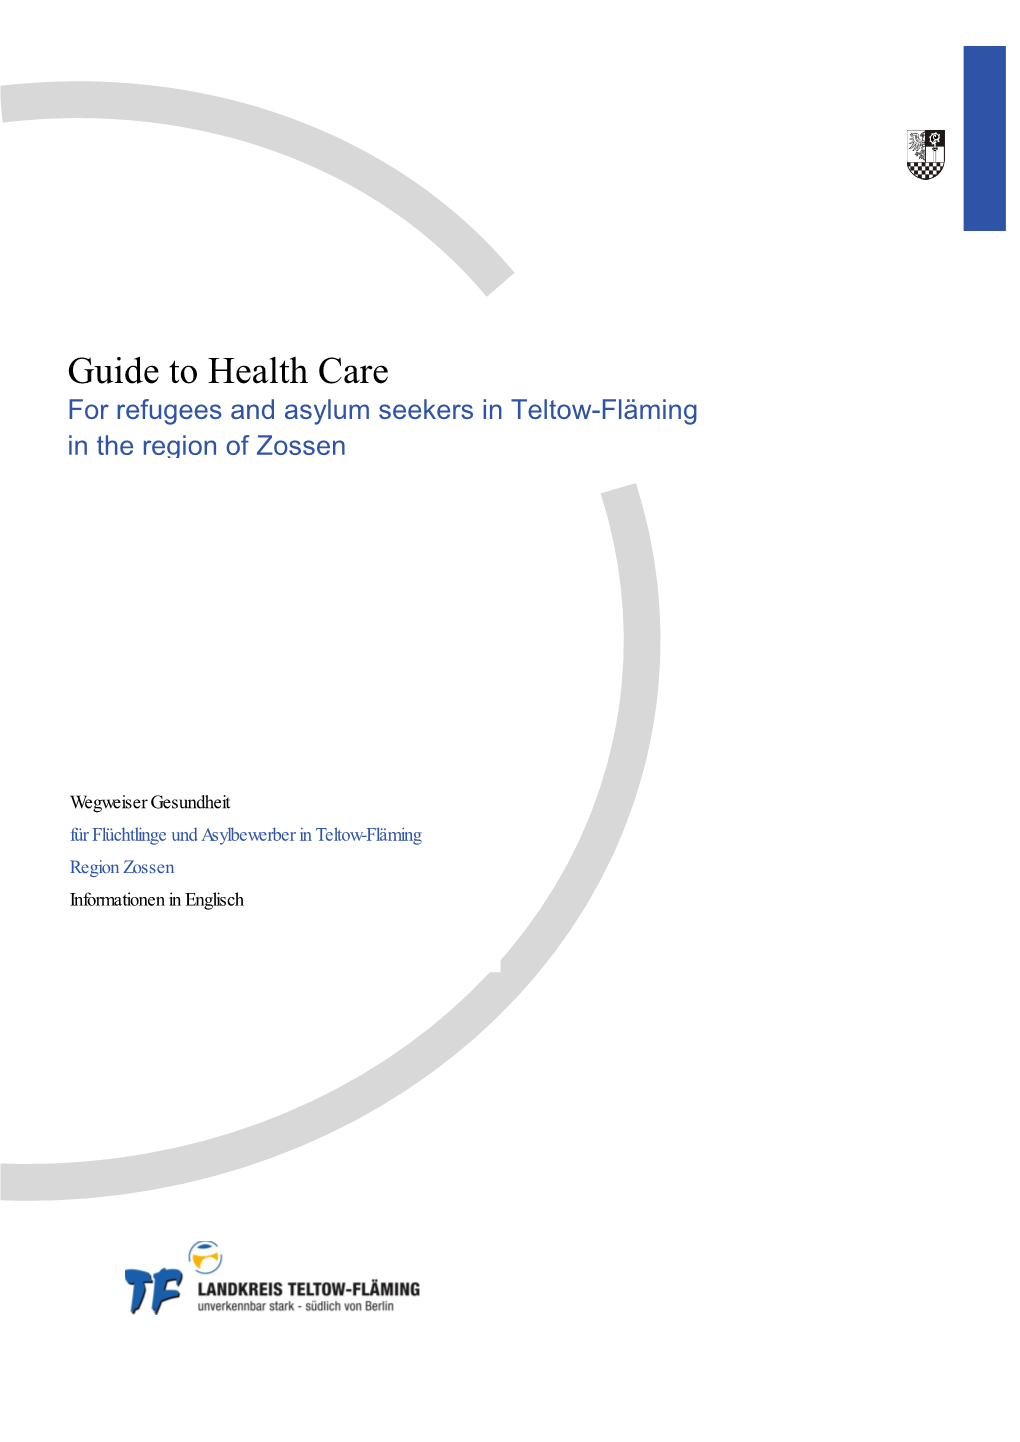 Guide to Health Care for Refugees and Asylum Seekers in Teltow-Fläming in the Region of Zossen